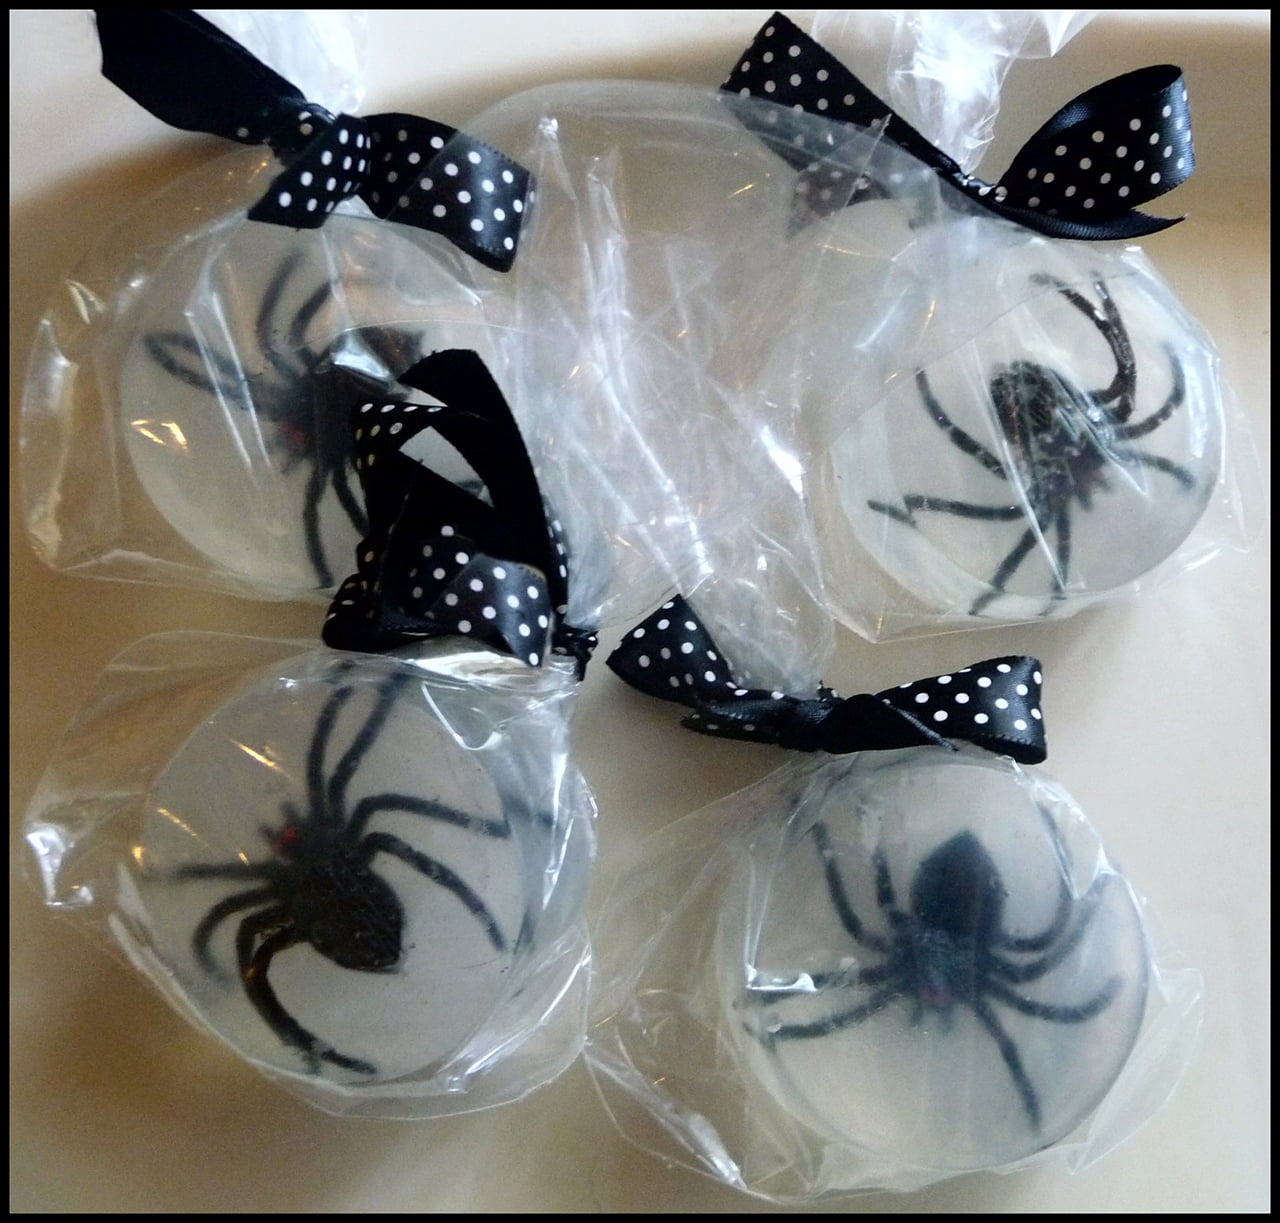 Melt-and-pour Spider Soaps